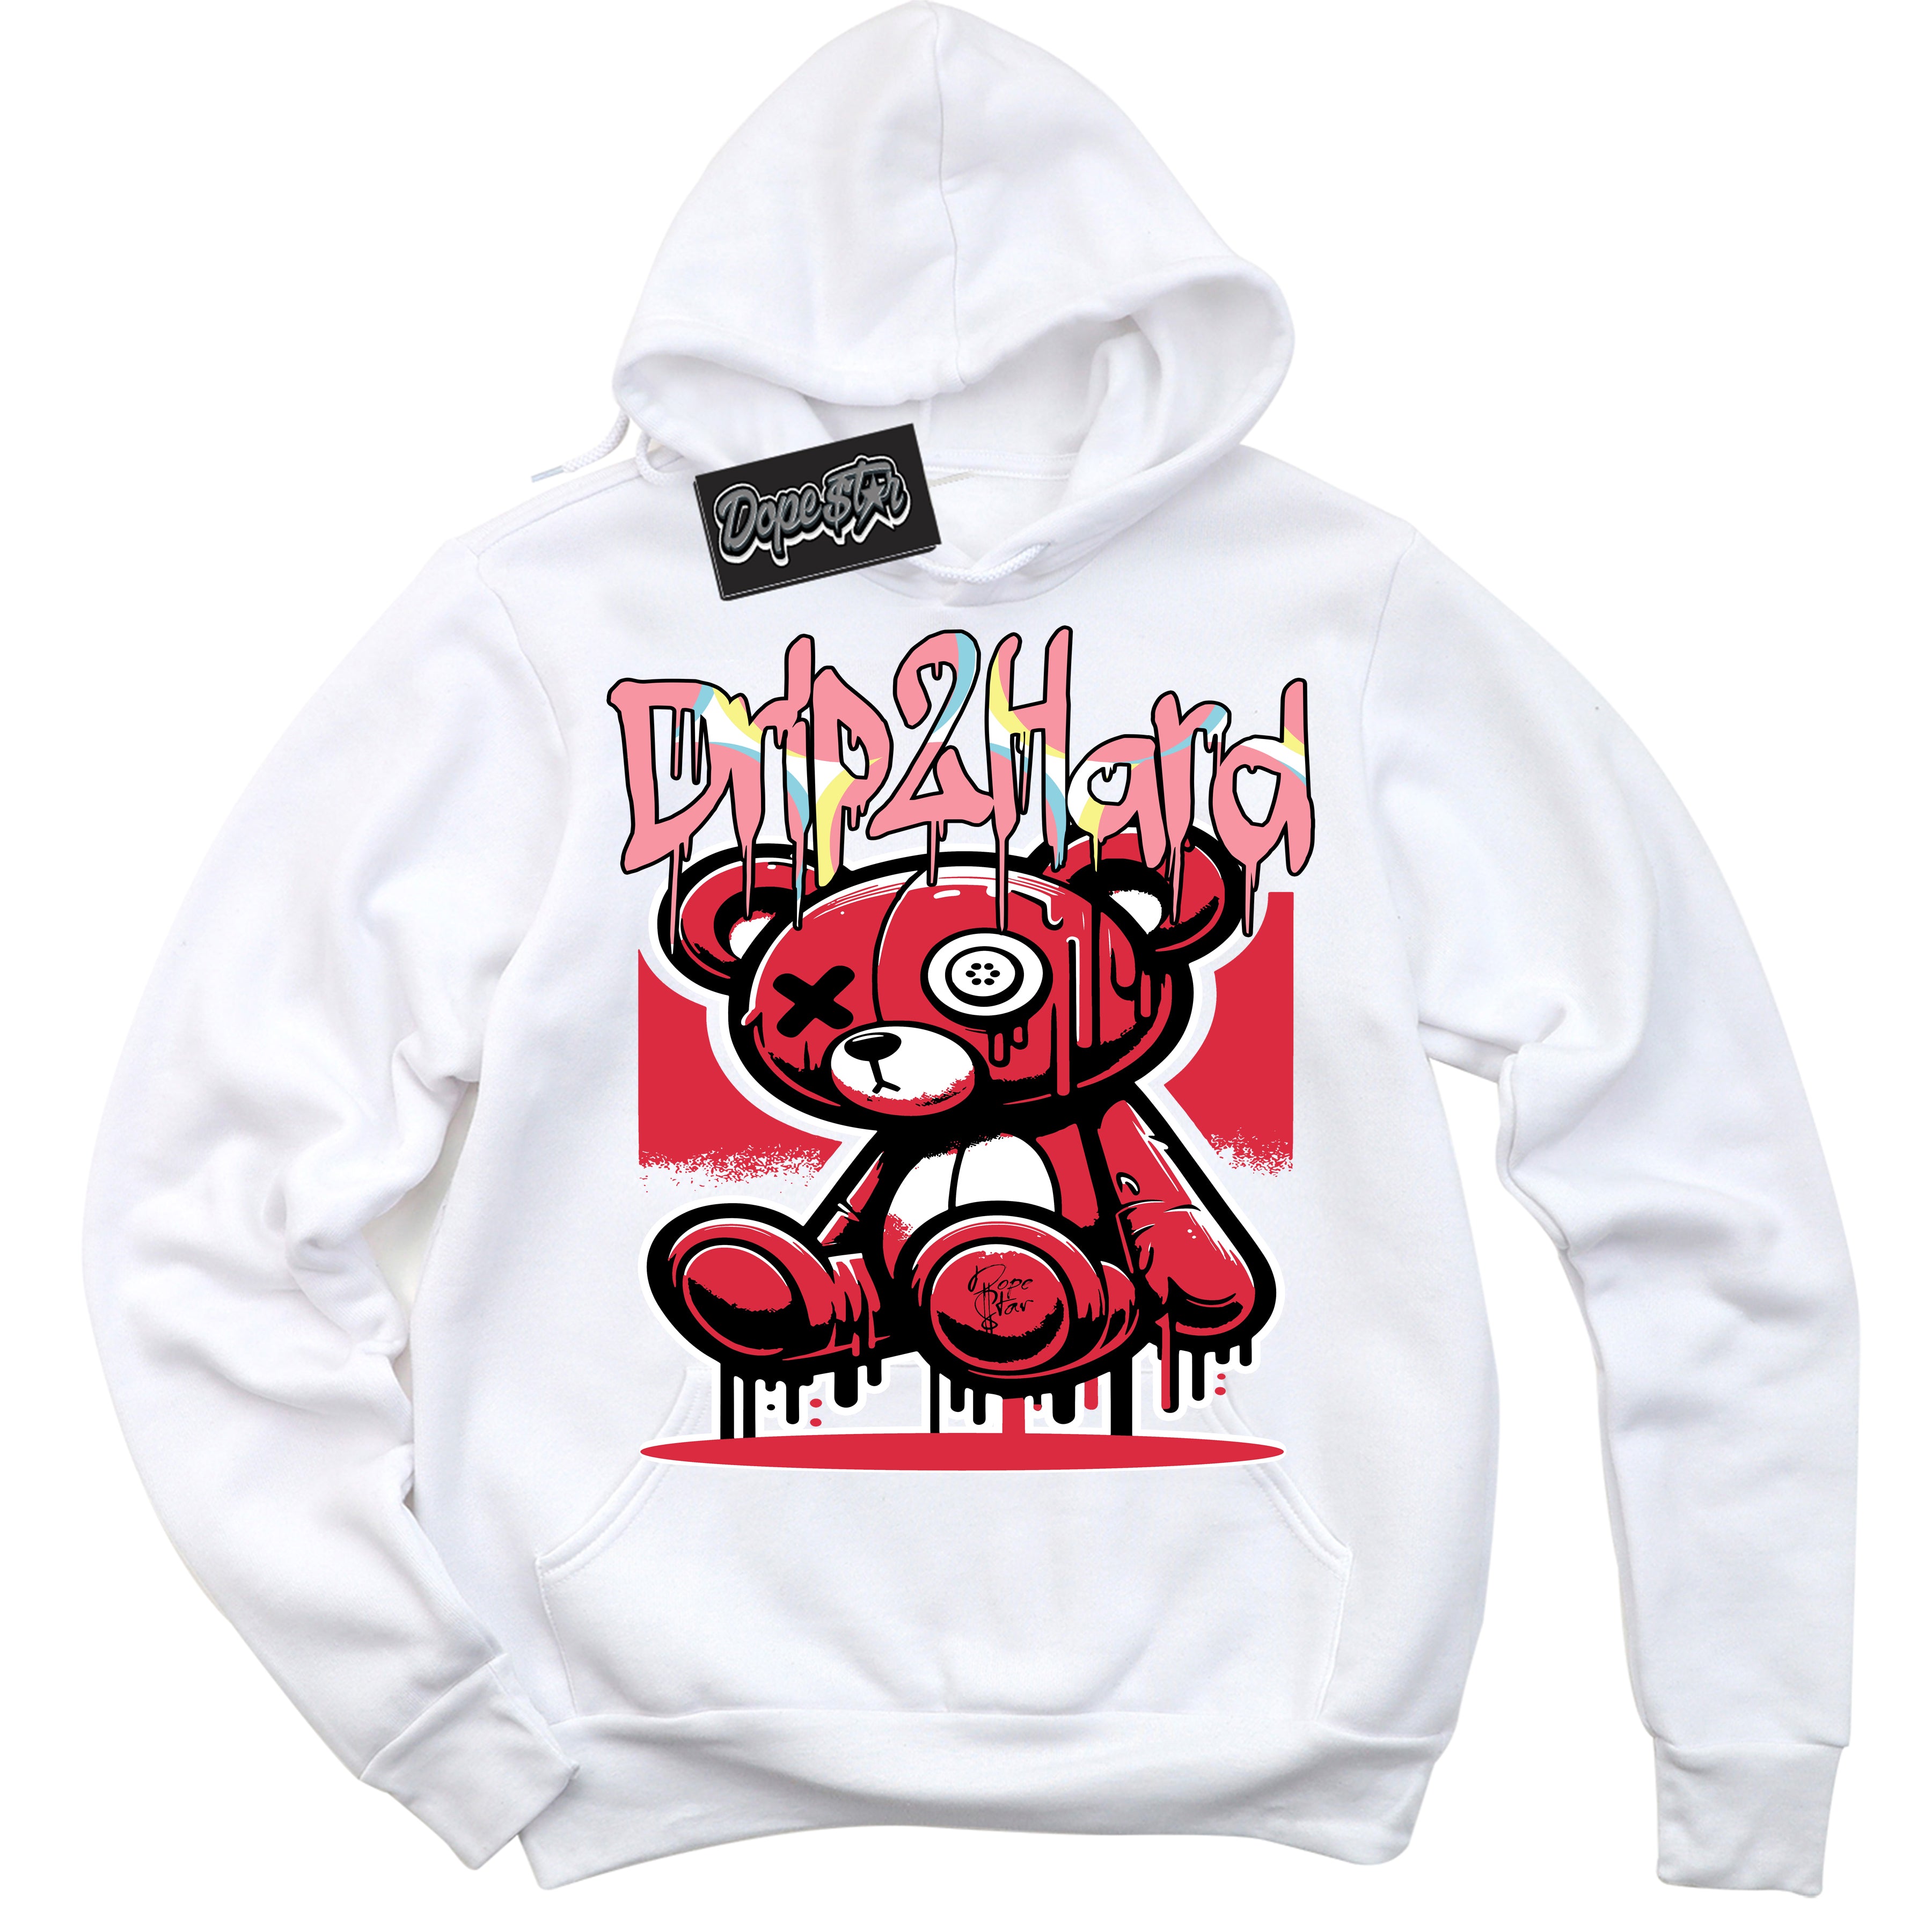 Cool White Graphic DopeStar Hoodie with “ Drip 2 Hard “ print, that perfectly matches Spider-Verse 1s sneakers